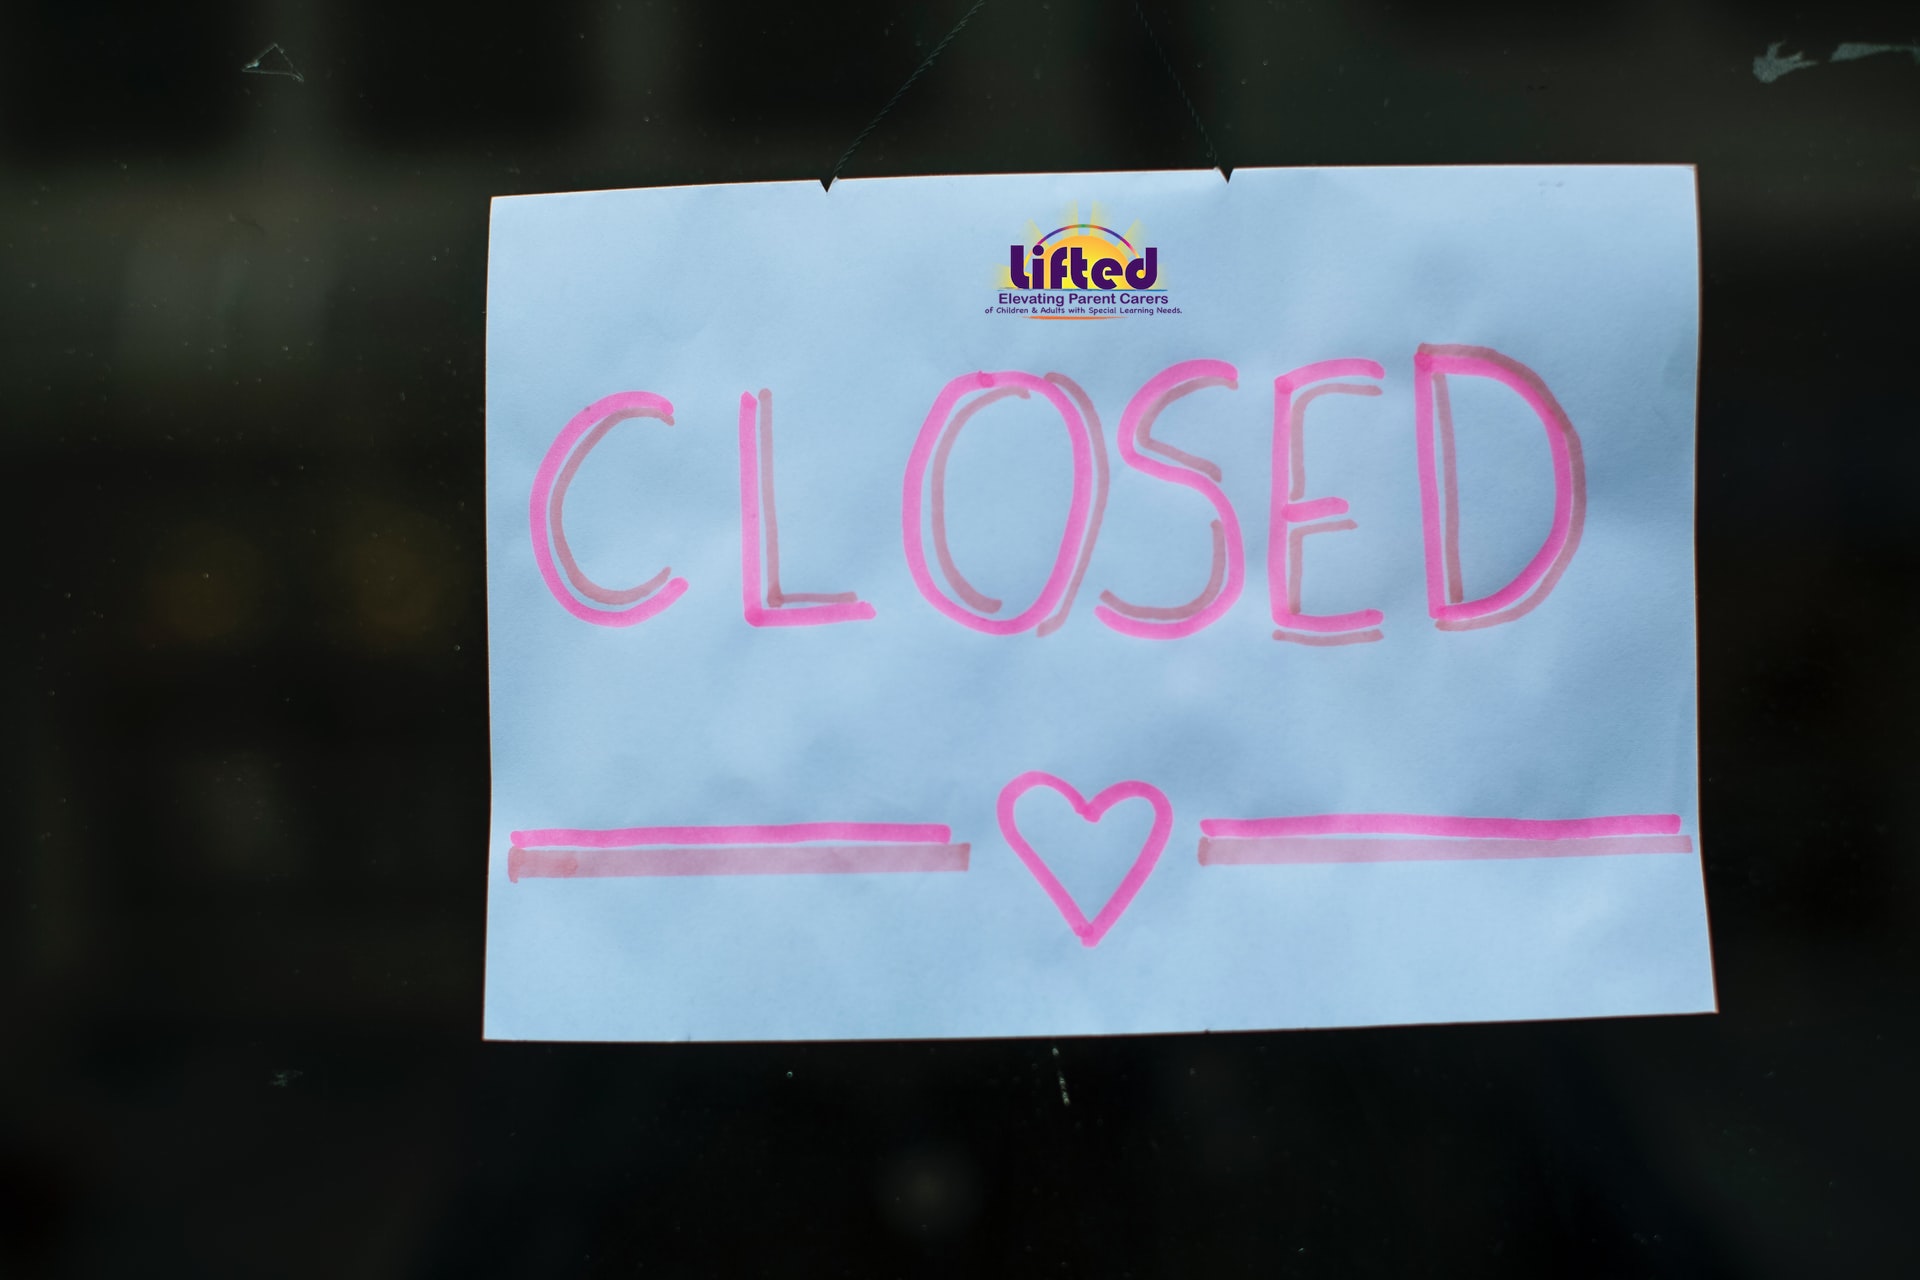 A sign saying 'Closed' with a drawing of a heart and Lifted's logo | Photo Credit: Markus Spiske on Unsplash